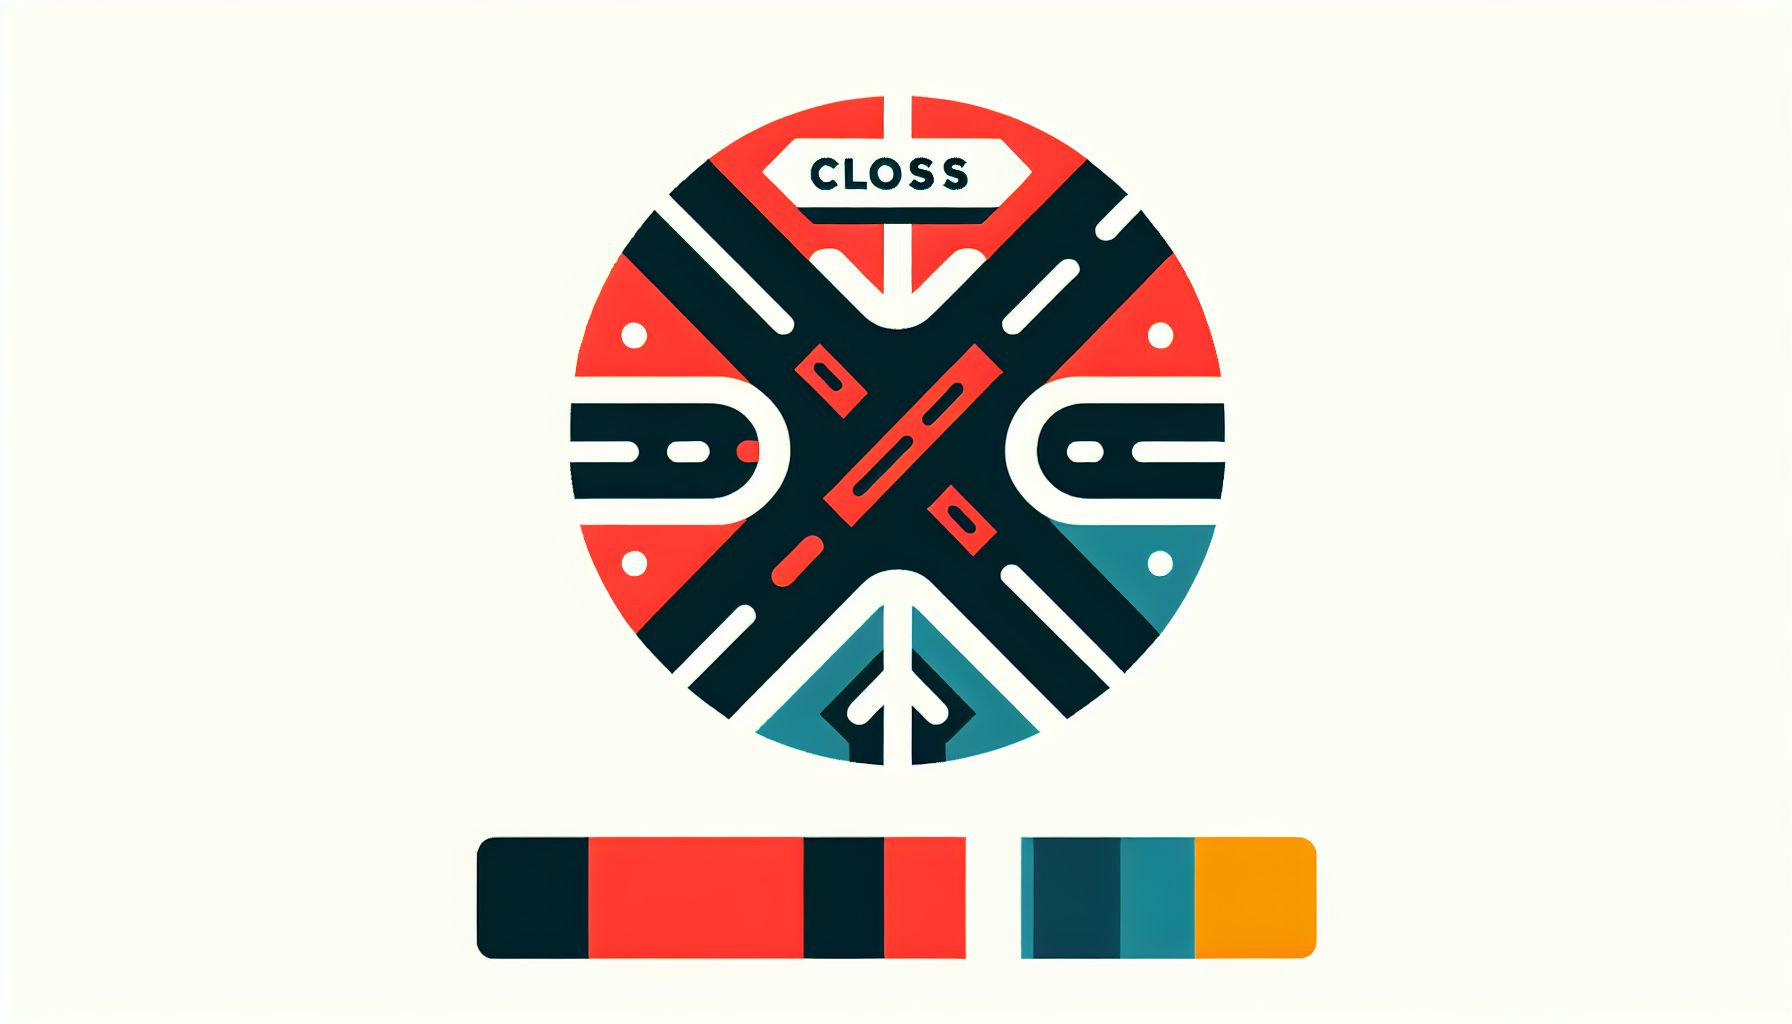 Crossroads in flat illustration style and white background, red #f47574, green #88c7a8, yellow #fcc44b, and blue #645bc8 colors.